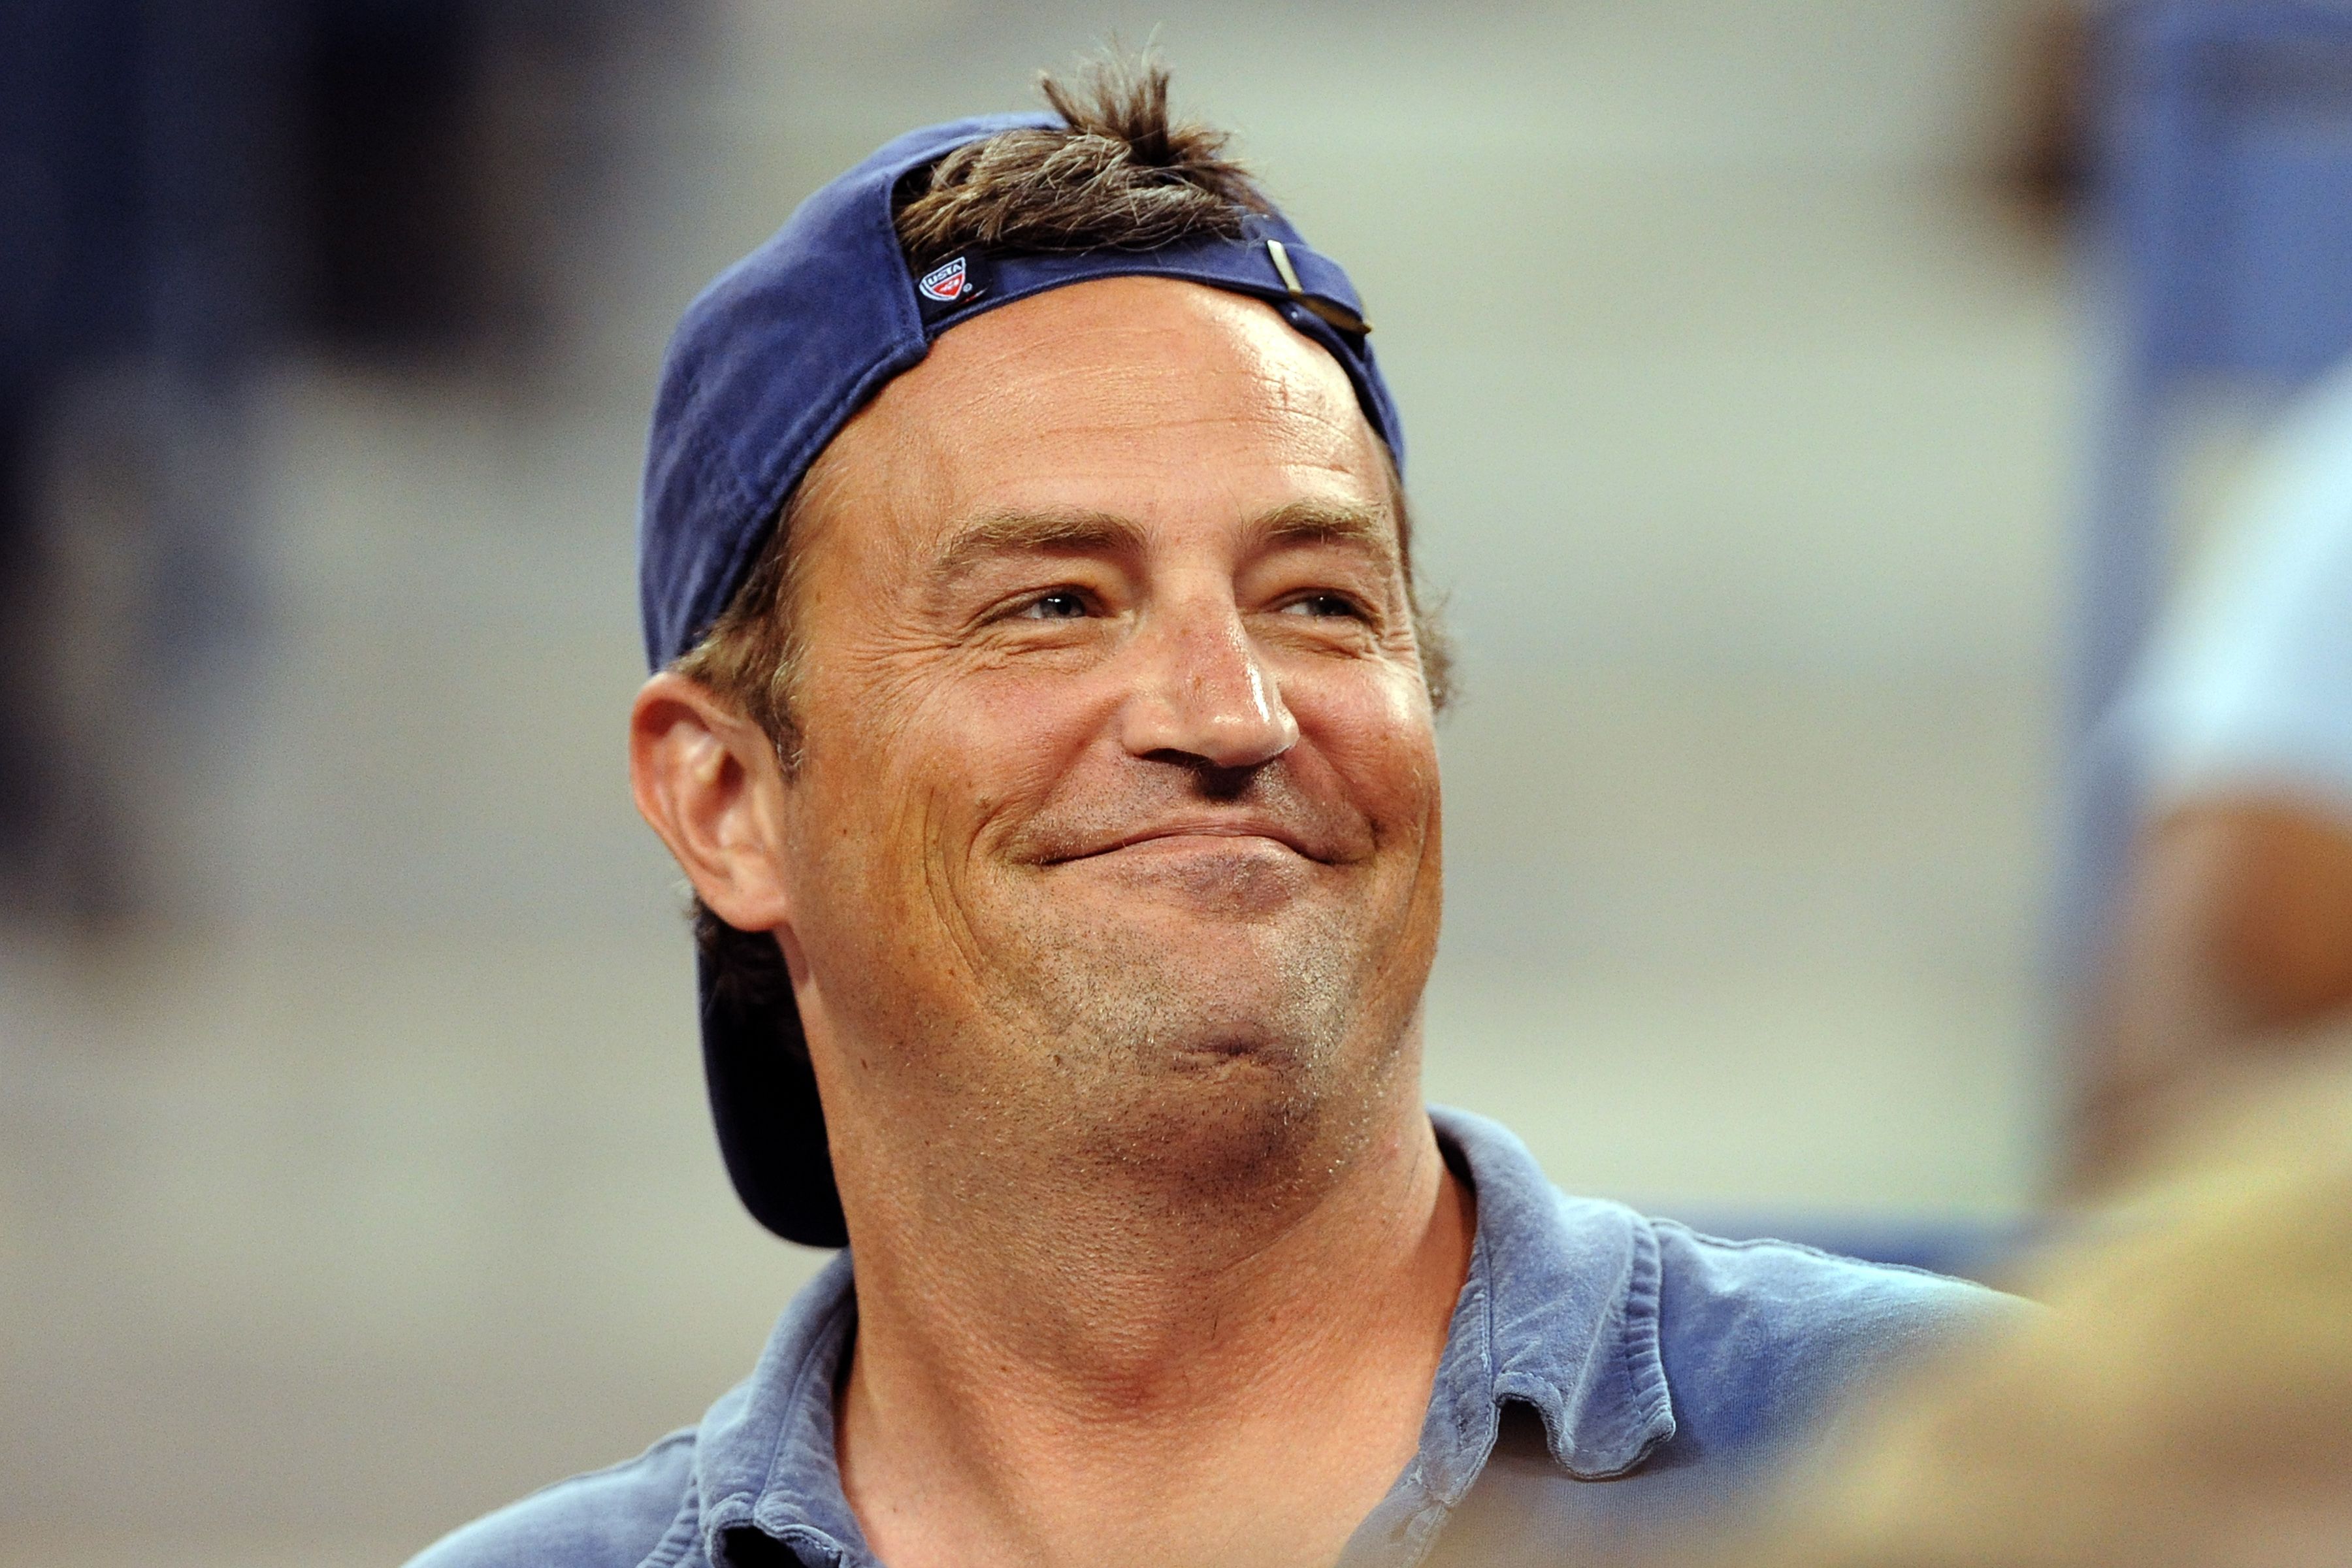 Matthew Perry pictured on day 13 of the 2011 U.S. Open Tennis Championships